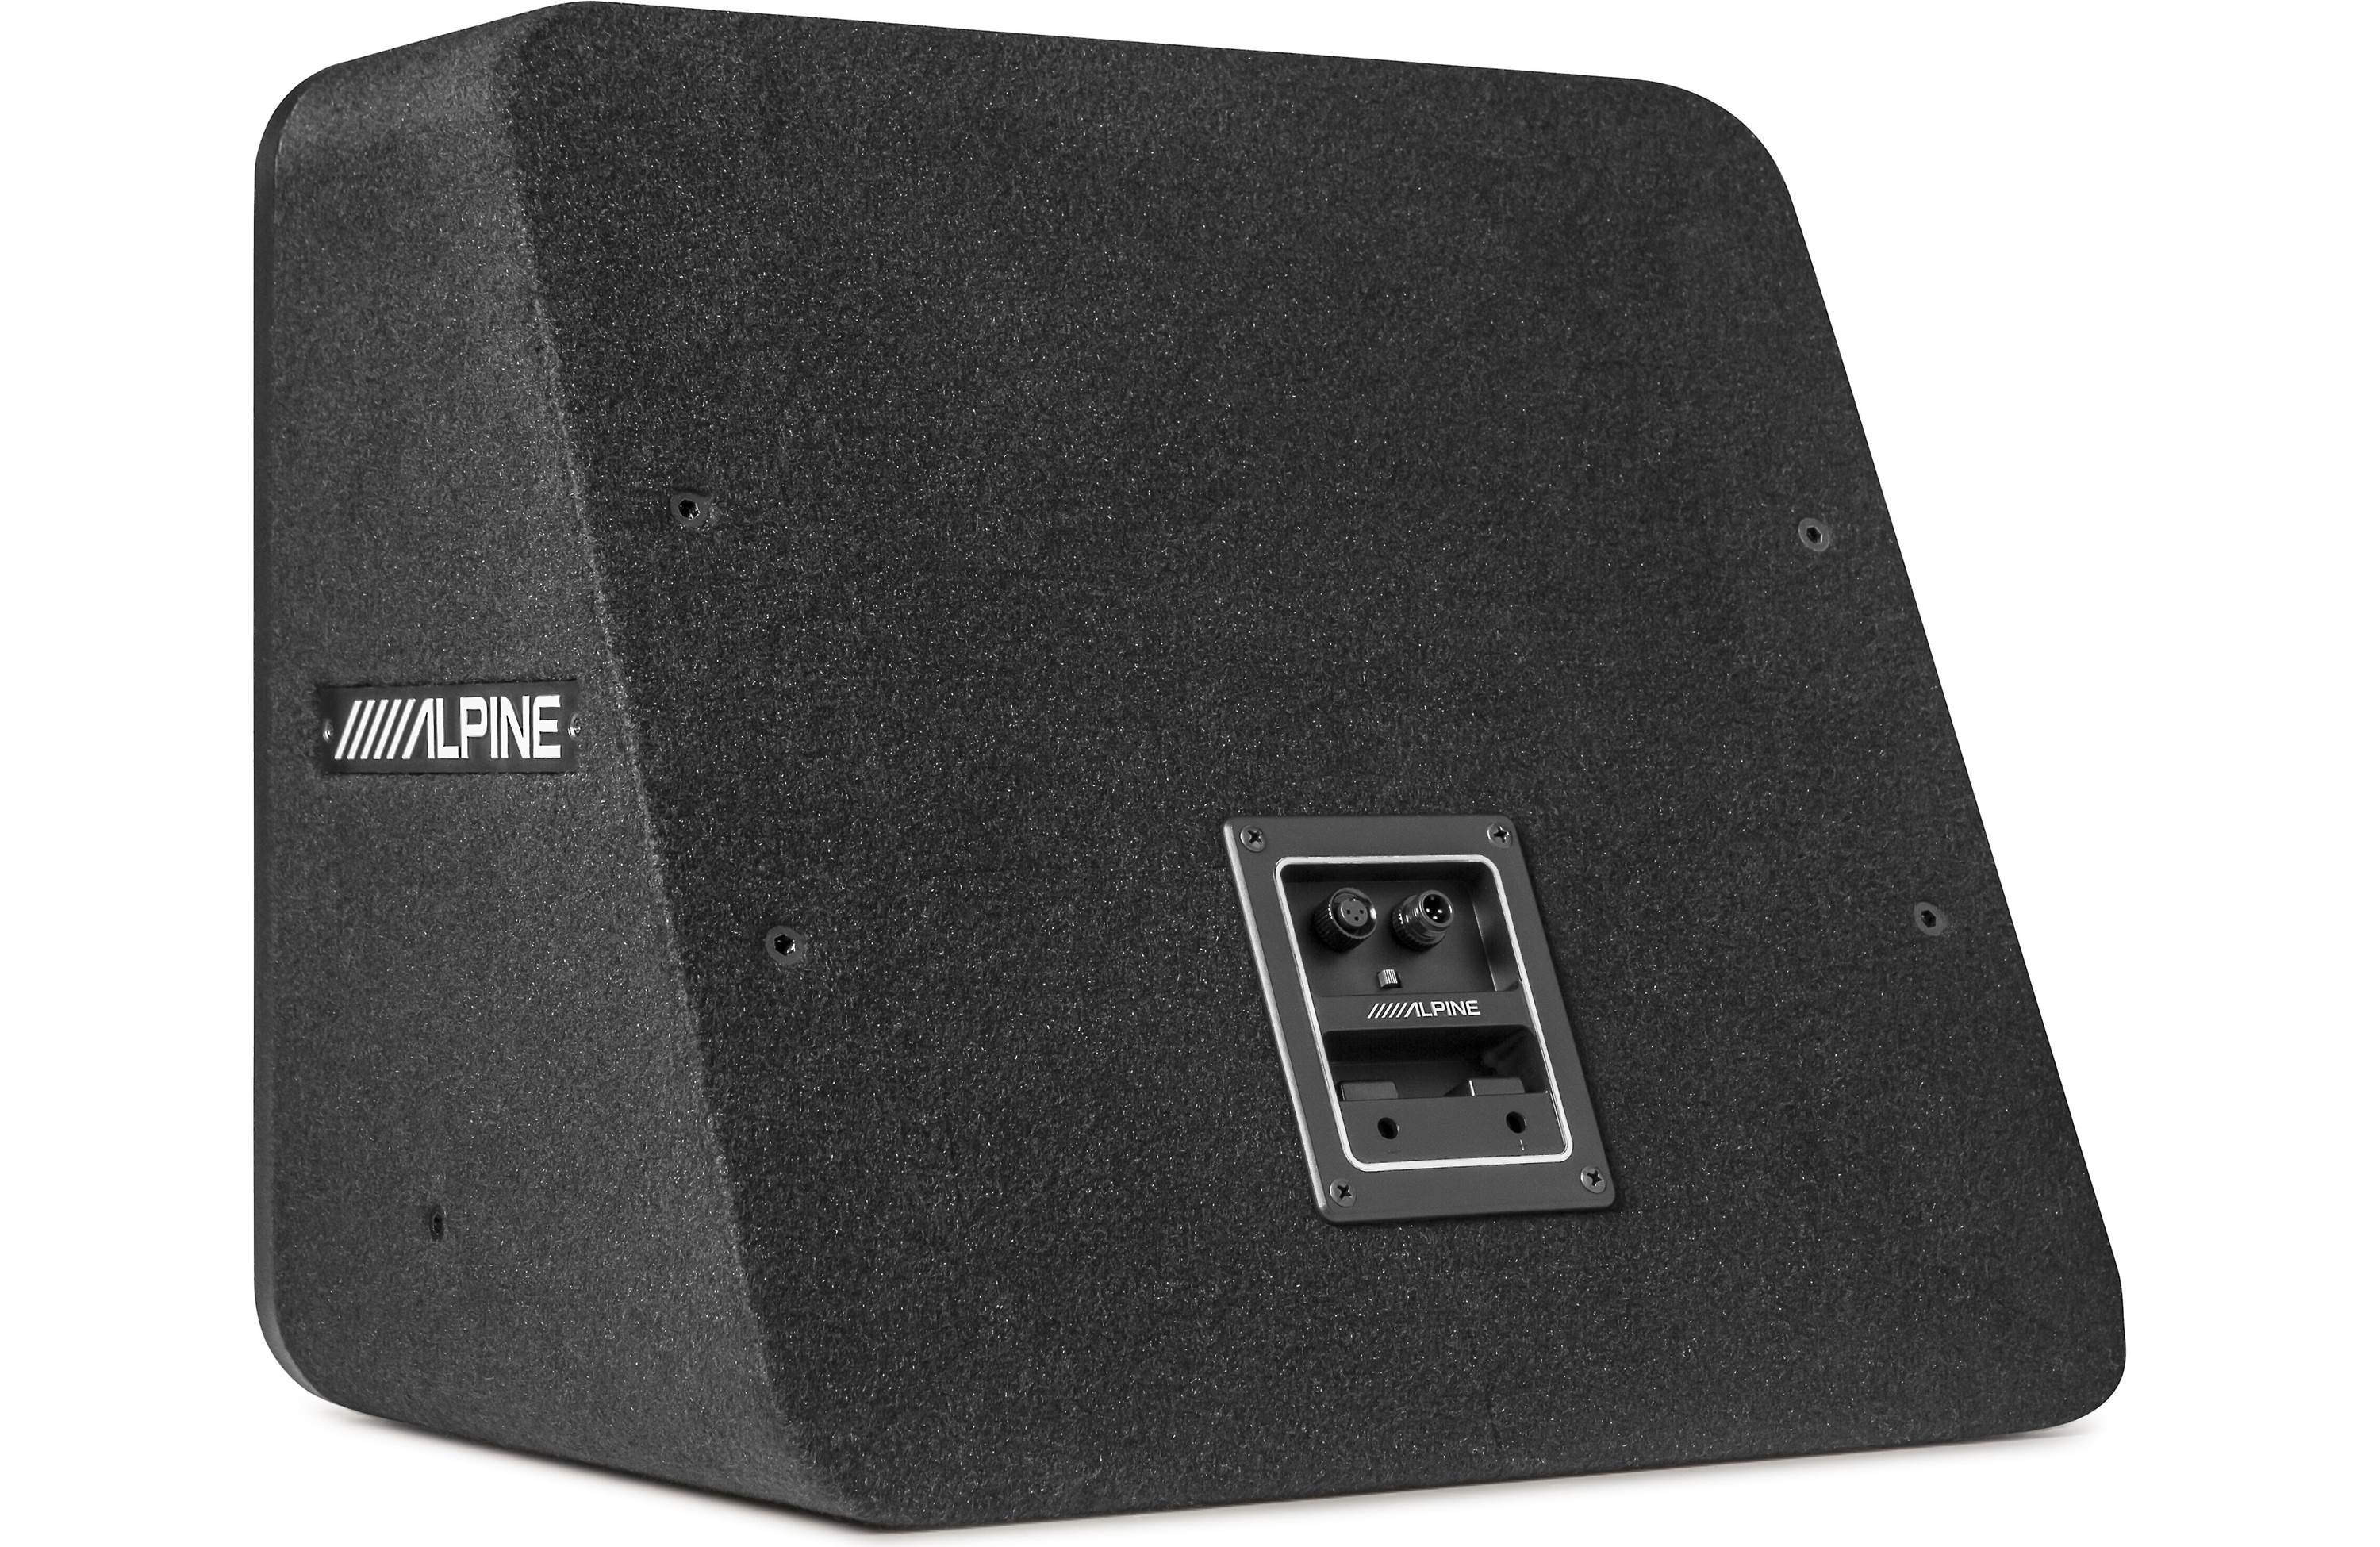 Alpine S2-SB12 PrismaLink™ S2-Series sealed subwoofer enclosure with 12" subwoofer and RGB lighting